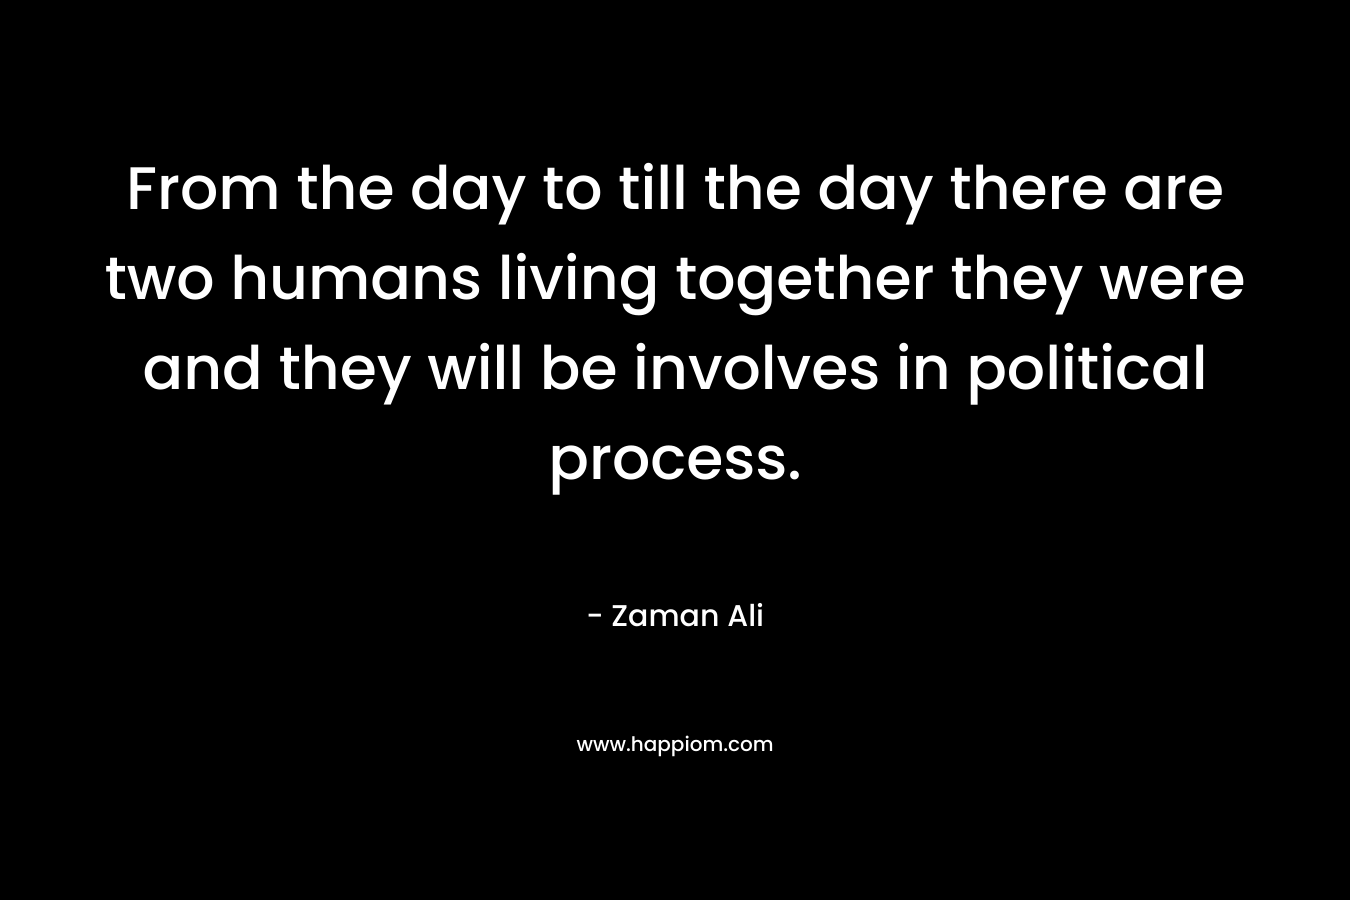 From the day to till the day there are two humans living together they were and they will be involves in political process.